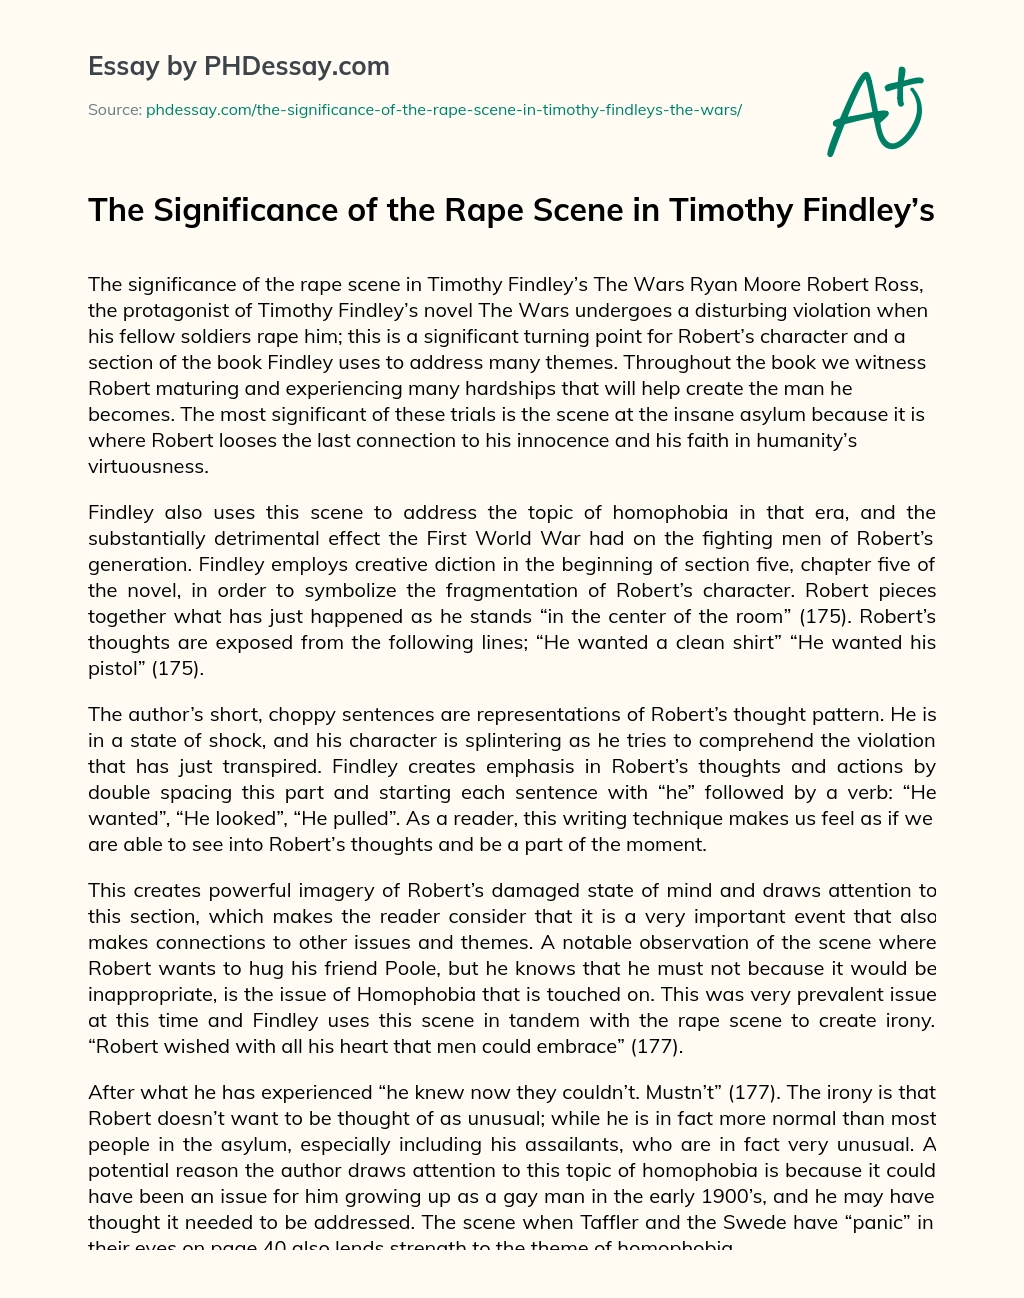 The Significance of the Rape Scene in Timothy Findley’s essay